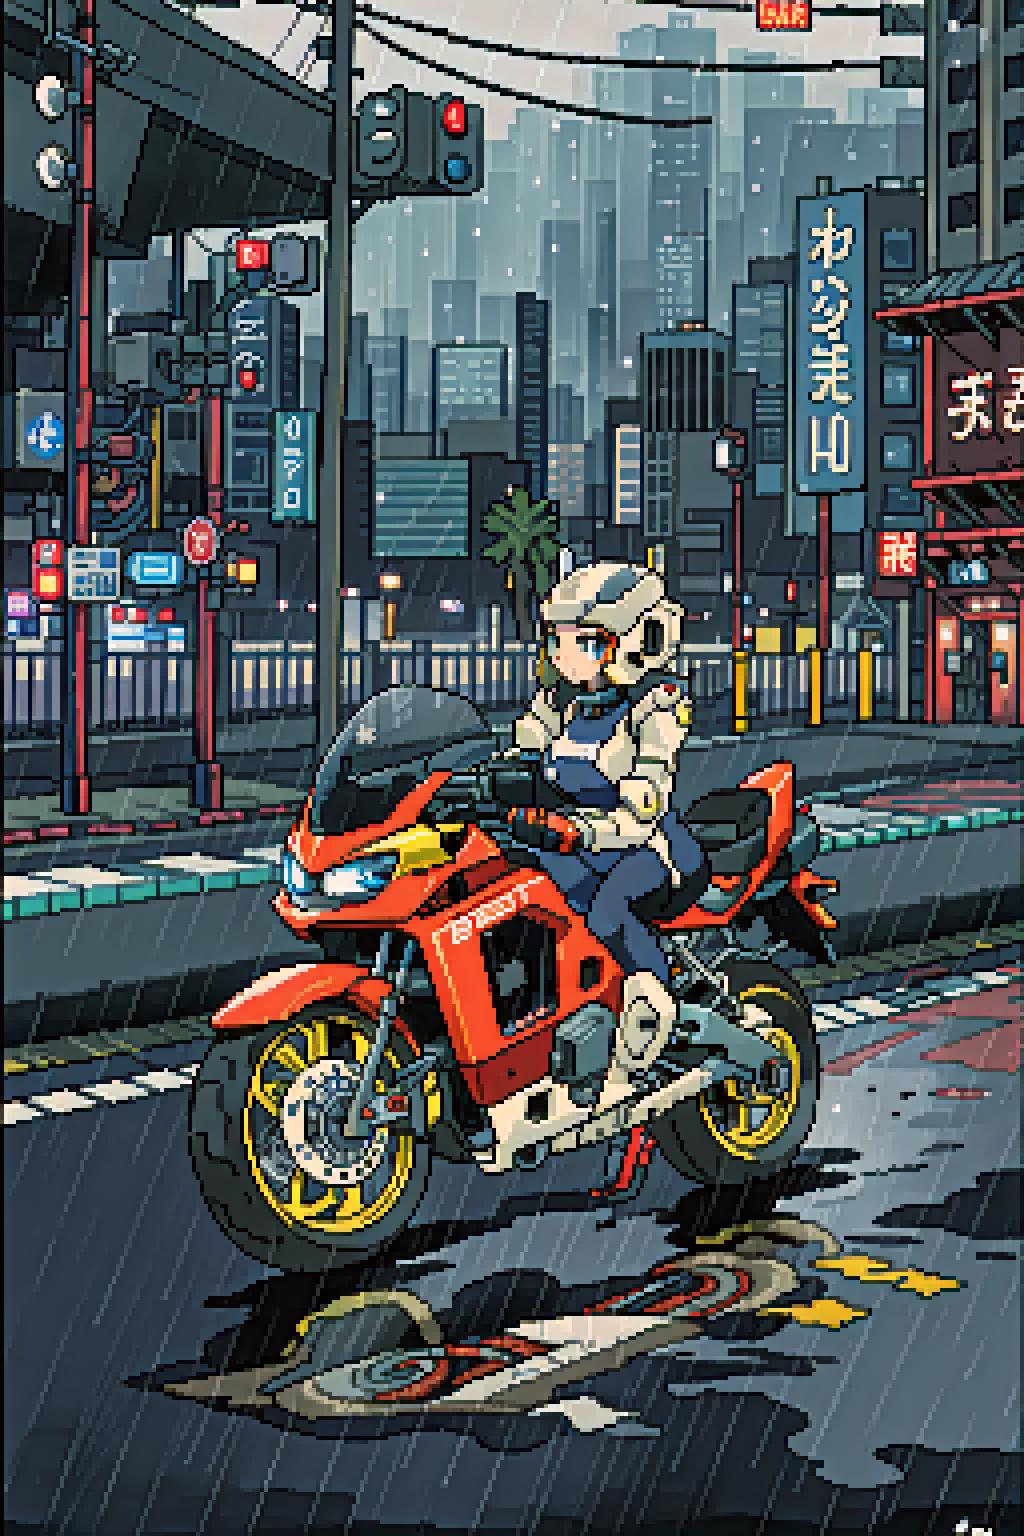 A cartoon image of a woman riding a red motorcycle on a city street.